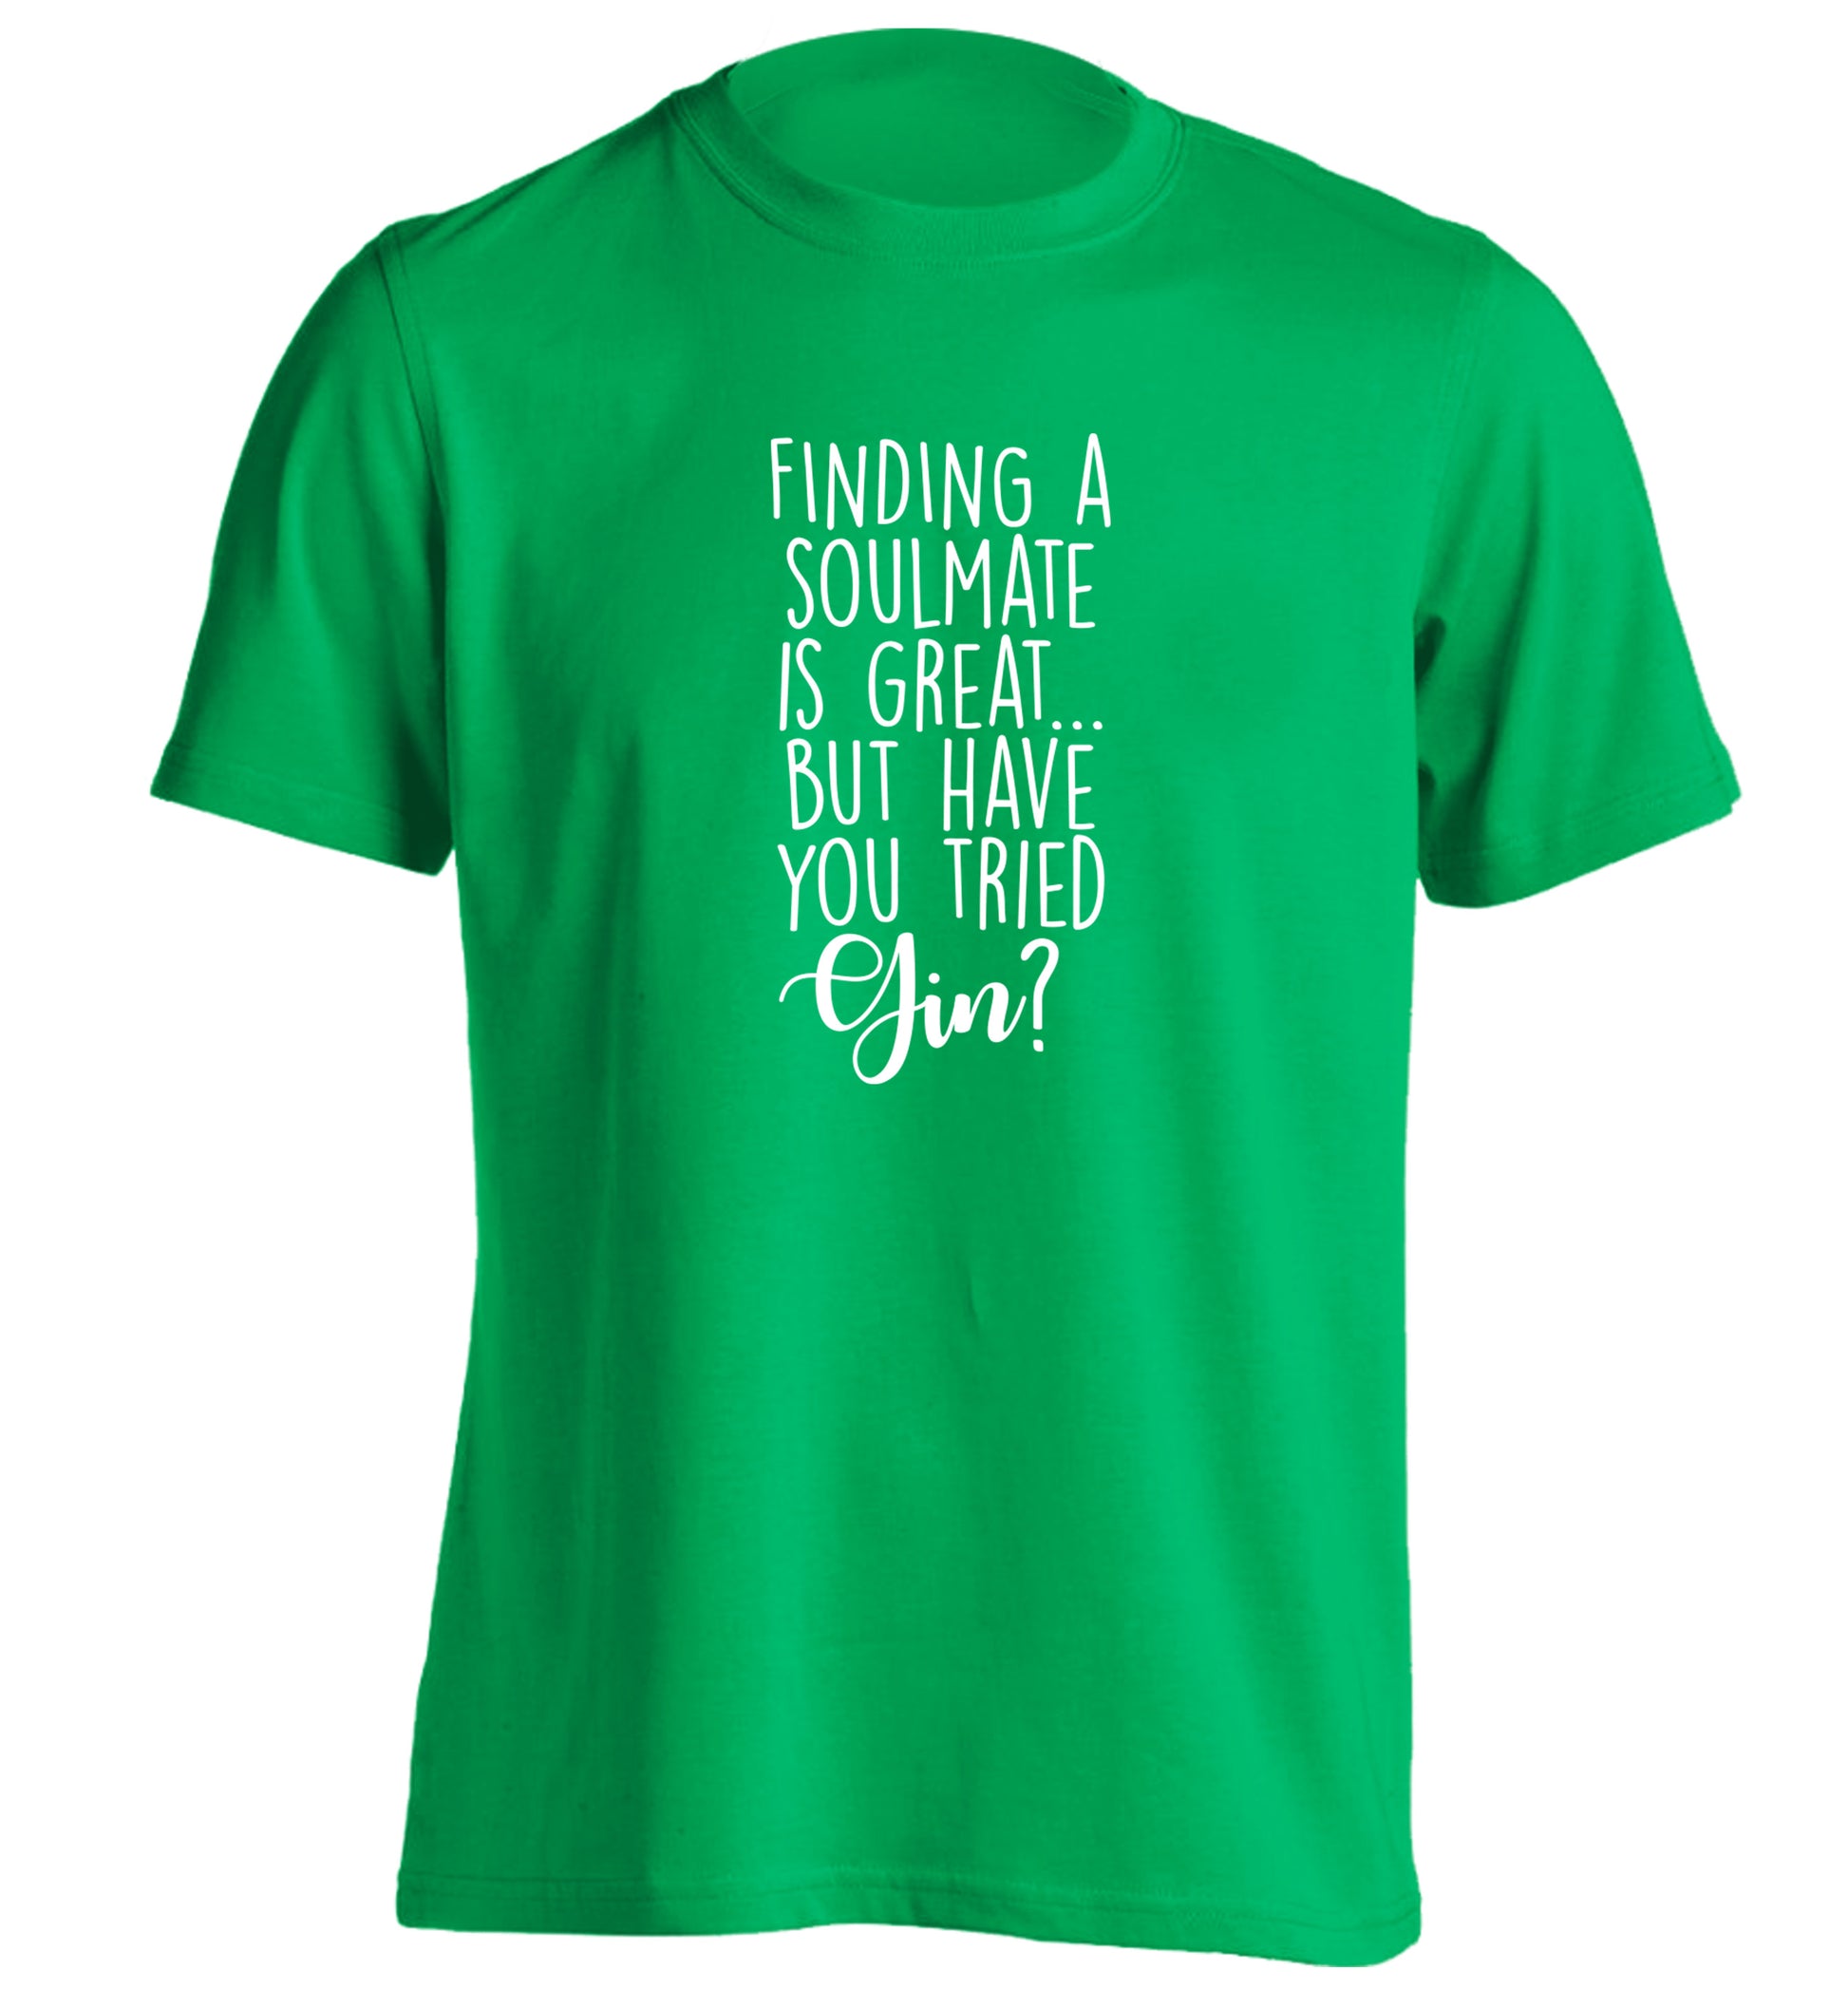 Finding a soulmate is great but have you tried gin? adults unisex green Tshirt 2XL